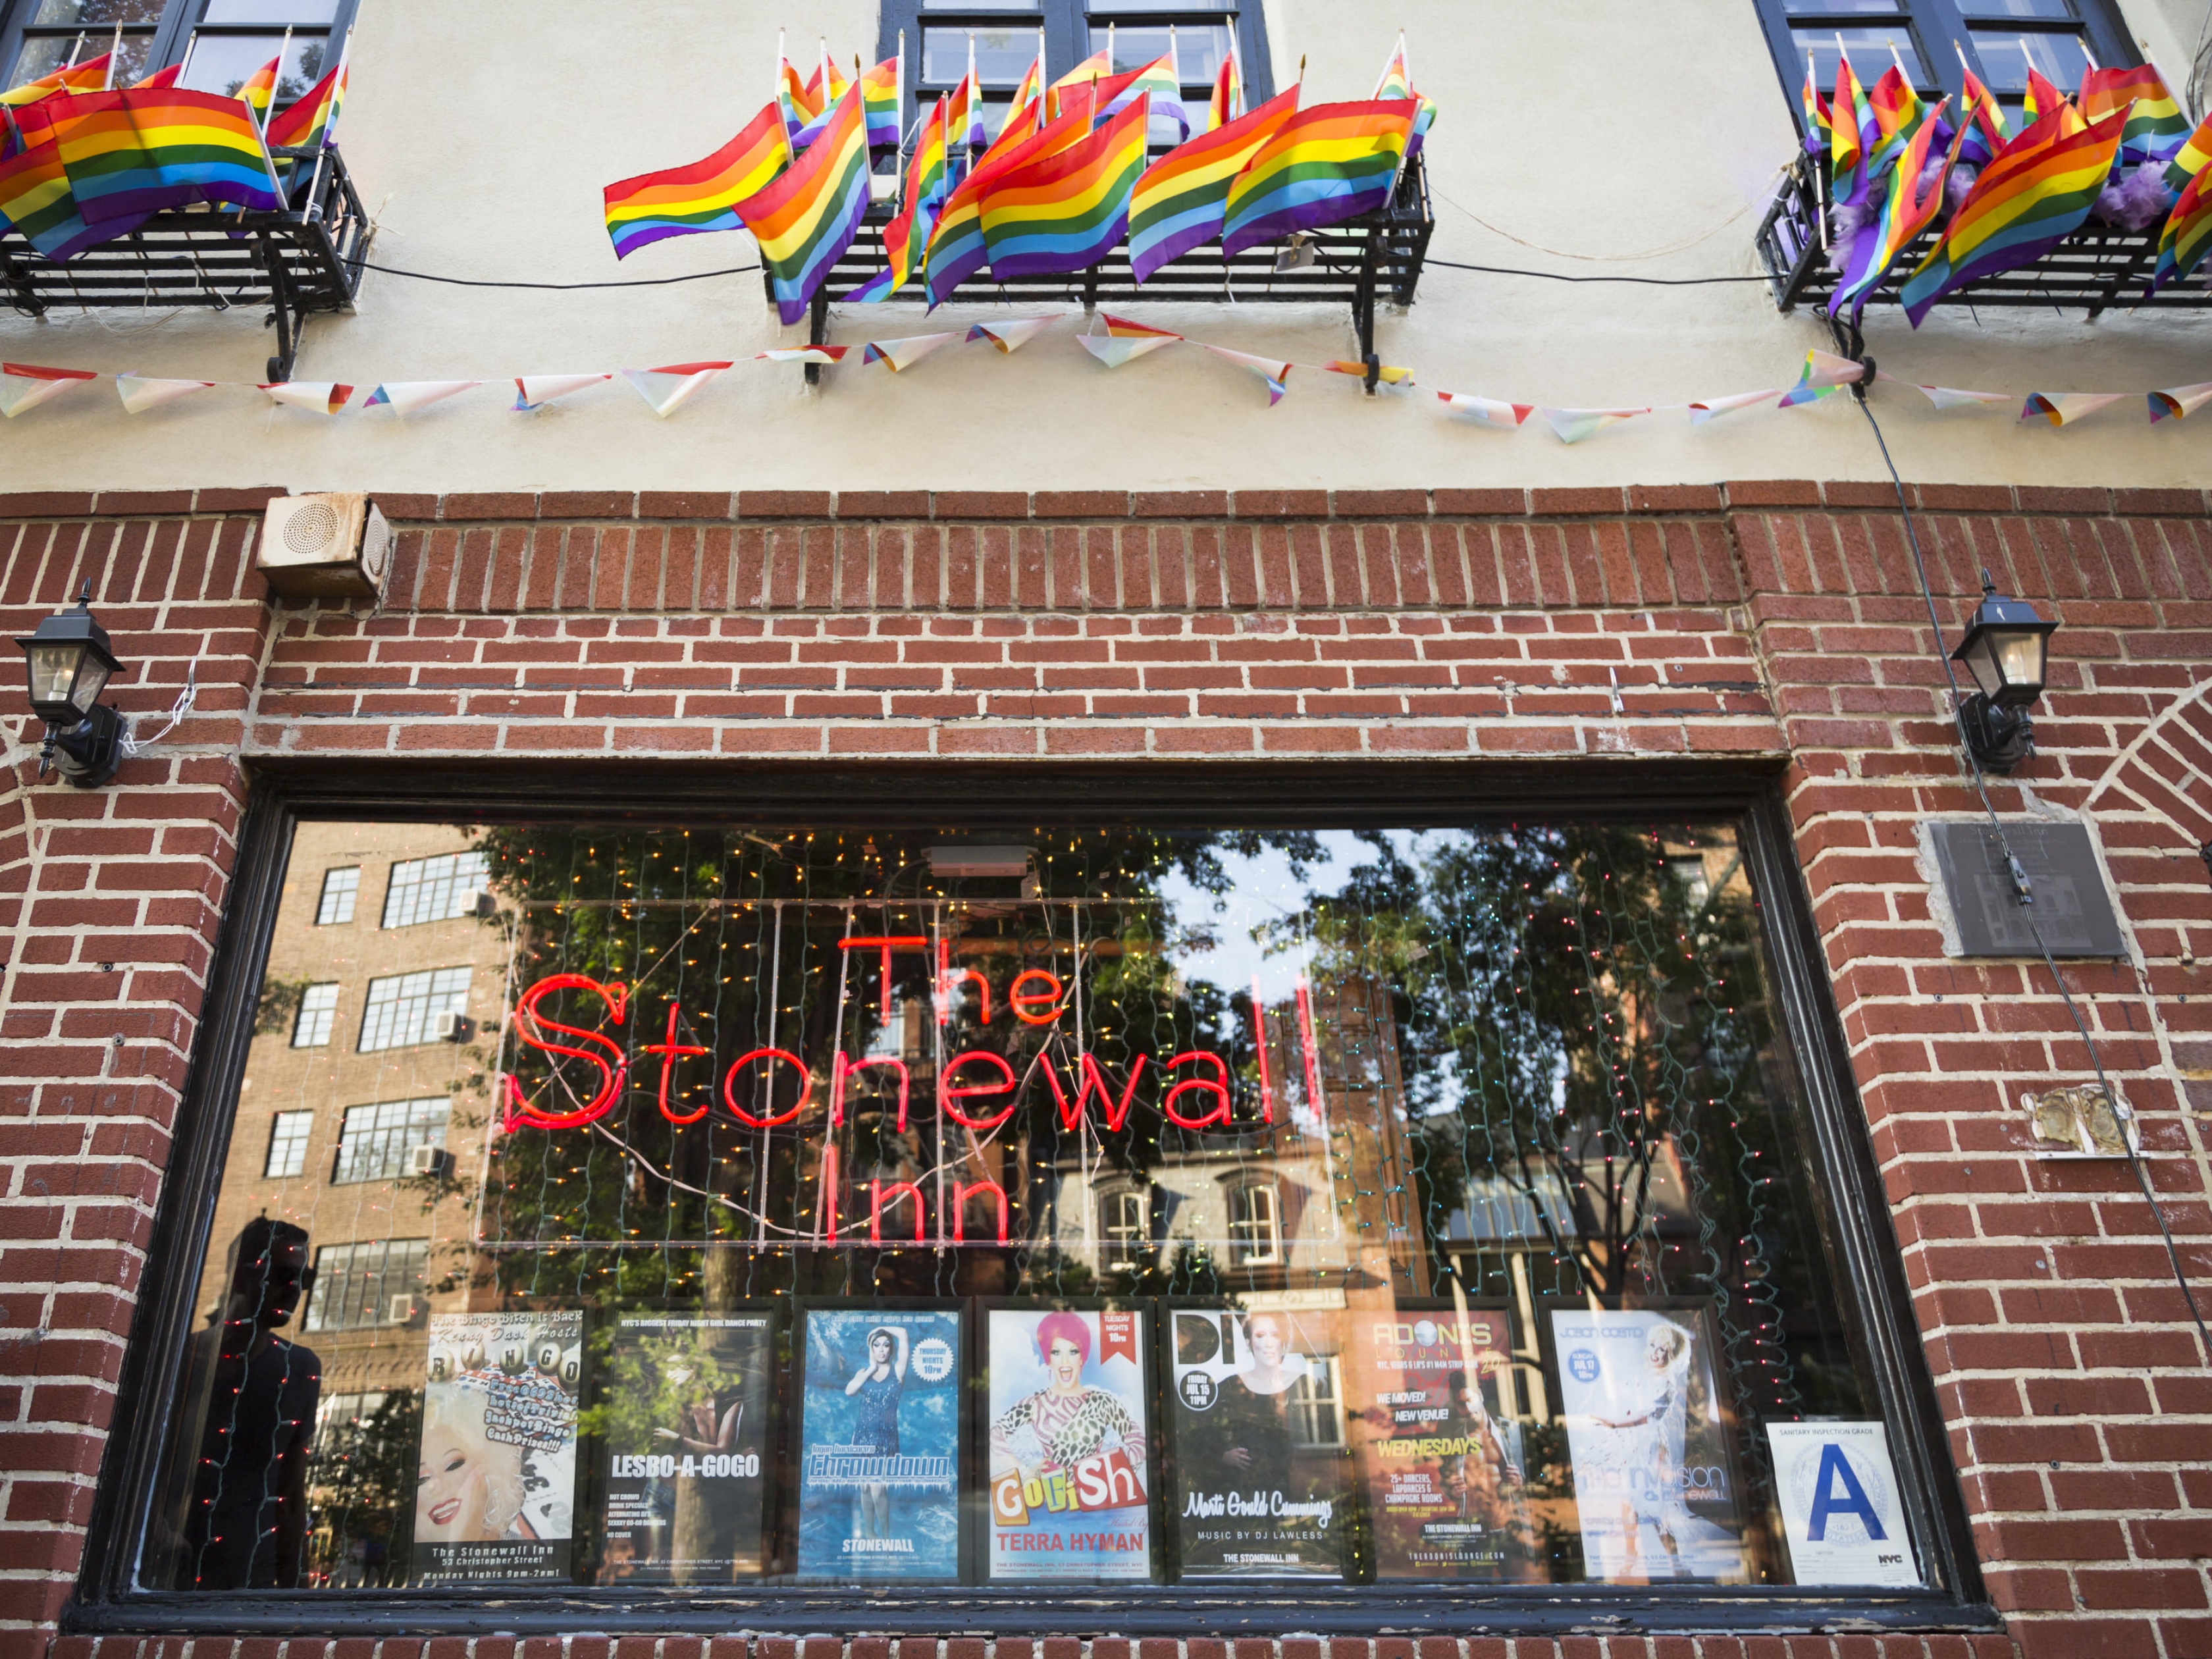 Neone sign saying "The Stonewall Inn" in a window of a brick building with many small rainbow flags flying above the window.